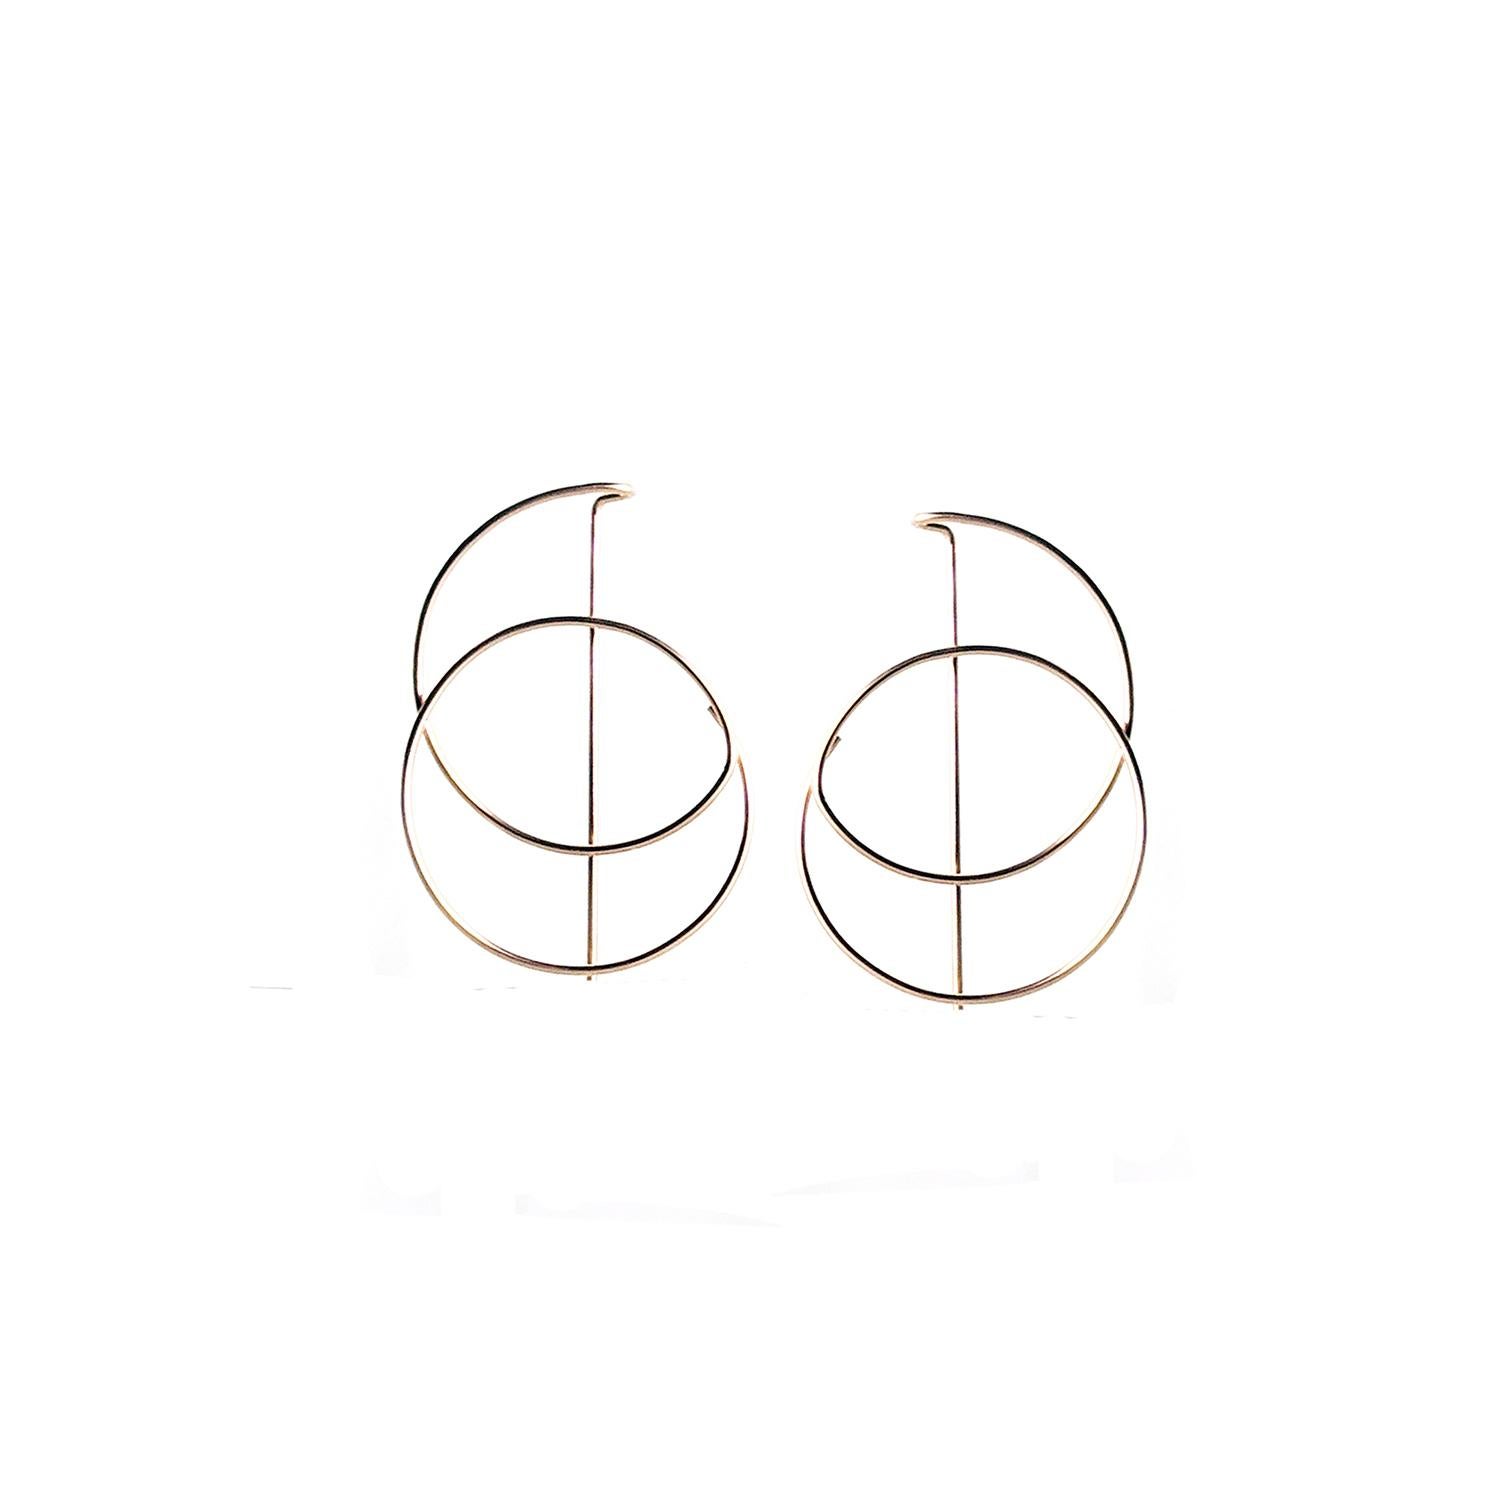 14K Yellow Gold Fill Aurora Hoops by Cindy Liebel Jewelry

Stand out with these lustrous spiral pull-through hoop earrings. Your go-to round hoops present an airy design offering simplicity with bold features adding flair to any look. The seamless